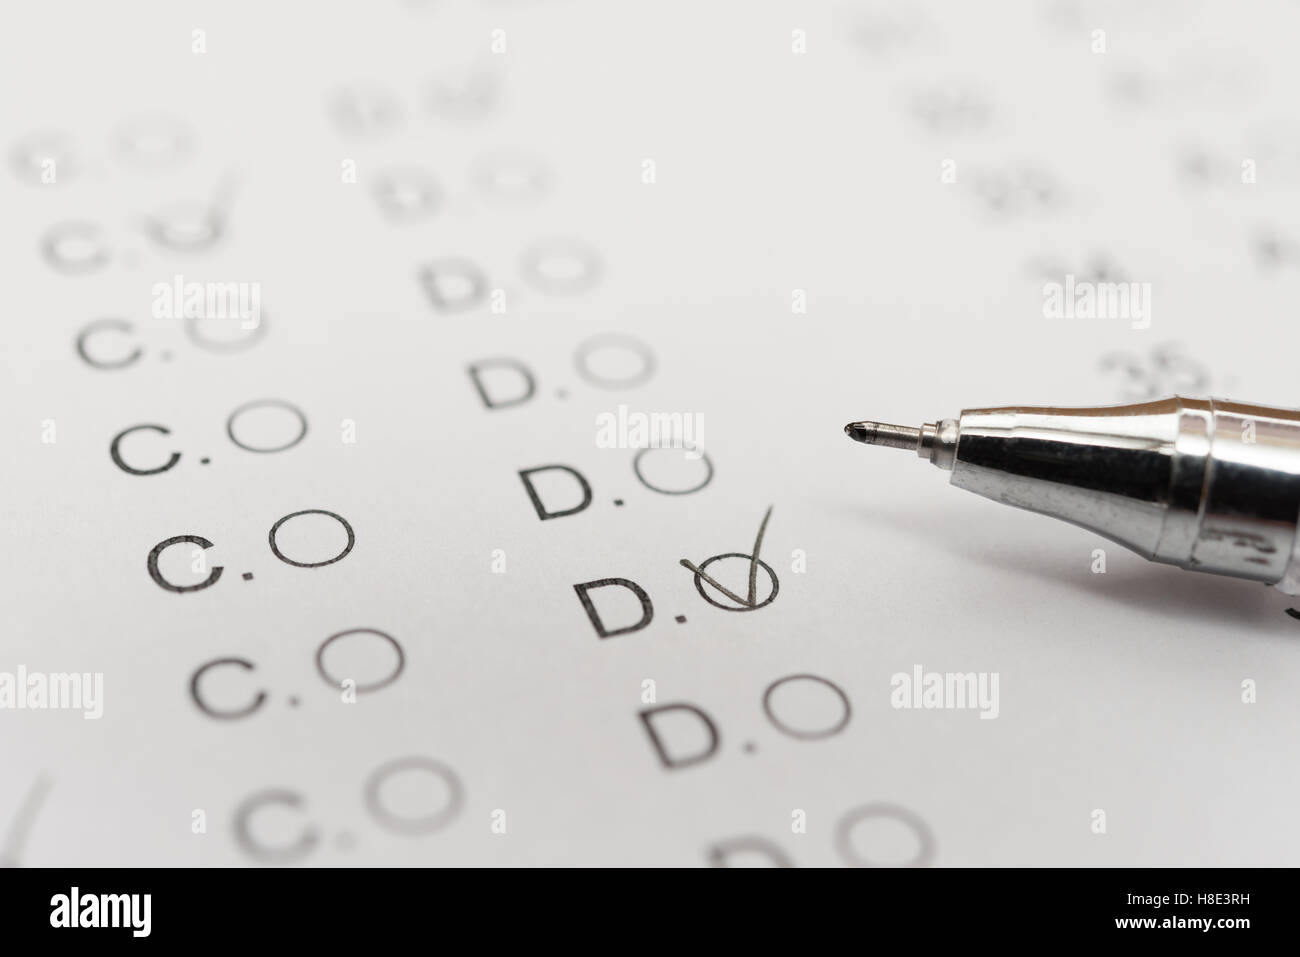 test score sheet with answers and ballpoint close up Stock Photo